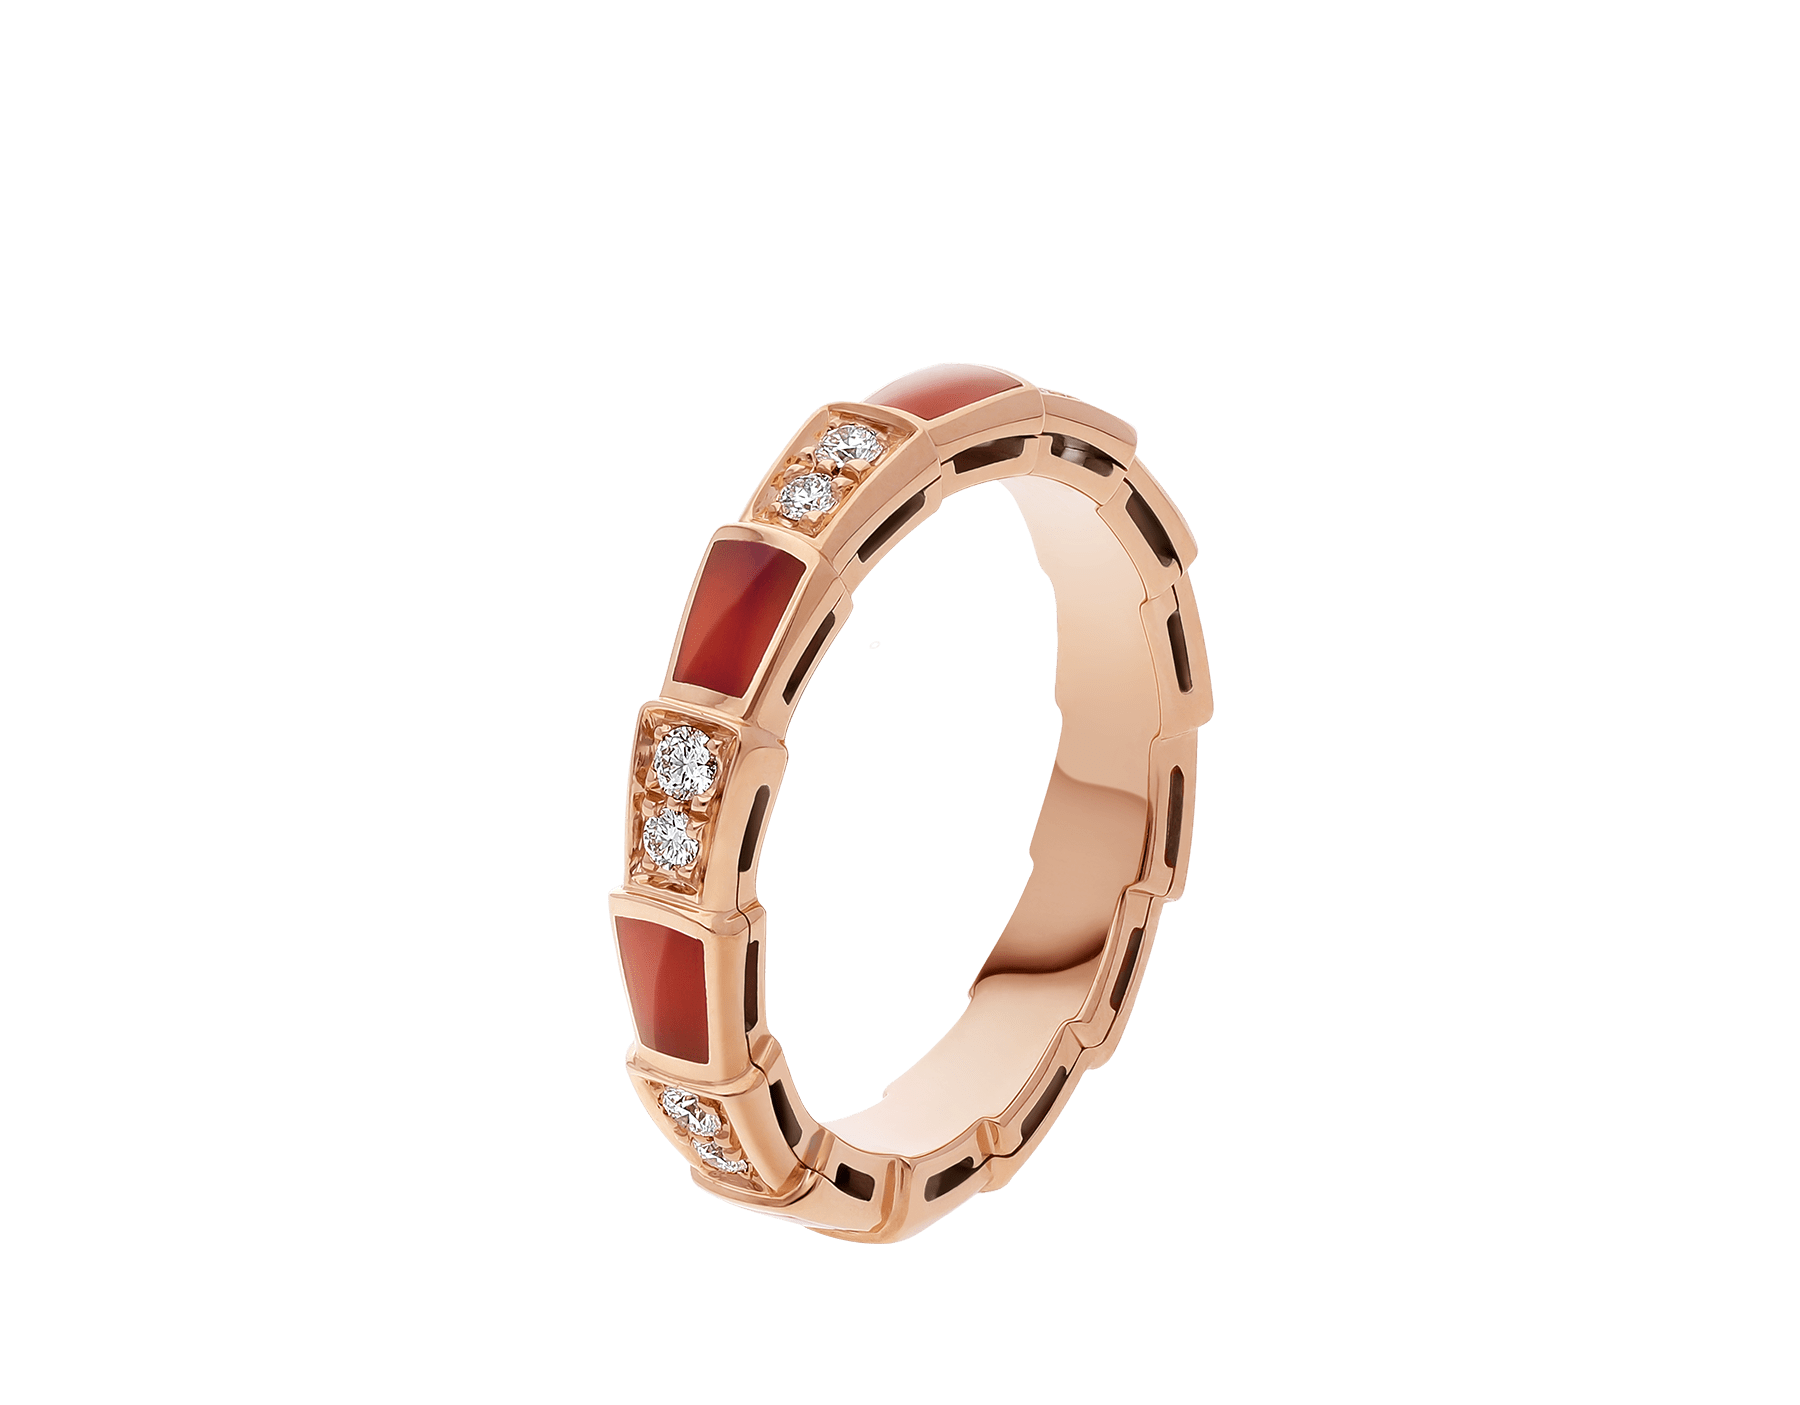 Serpenti Viper band ring in 18 kt rose gold, set with carnelian elements and pavé diamonds. AN857926 image 1